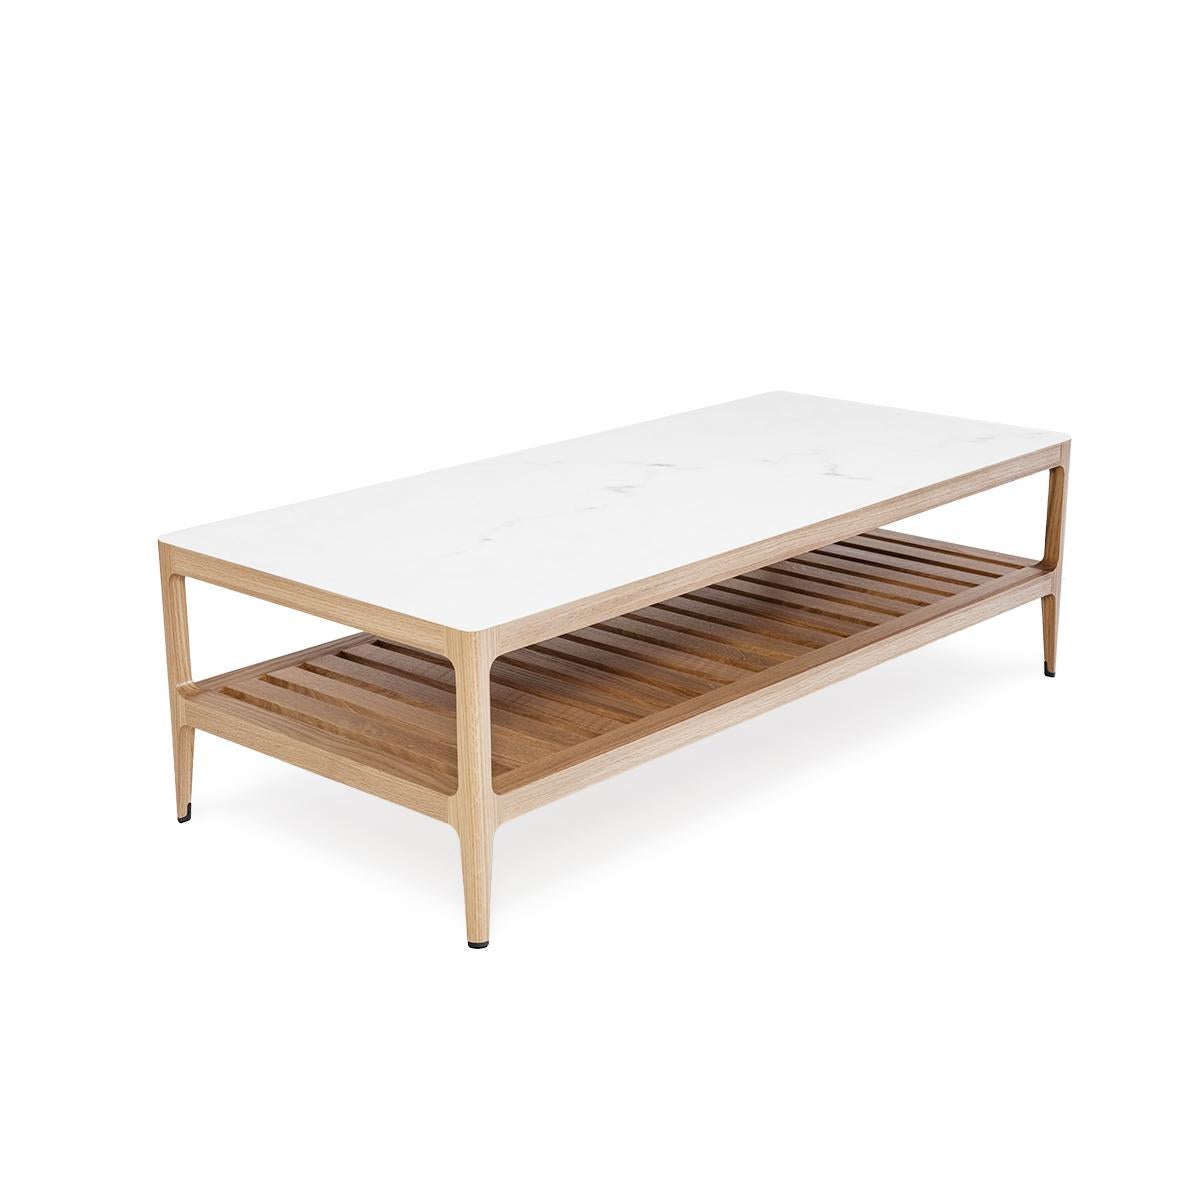 The Radius oak coffee table from Munson Furniture draws inspiration from midcentury designs and fits beautifully with both traditional and contemporary interiors fits. The table can be customized in dimensions to fit your particular space and